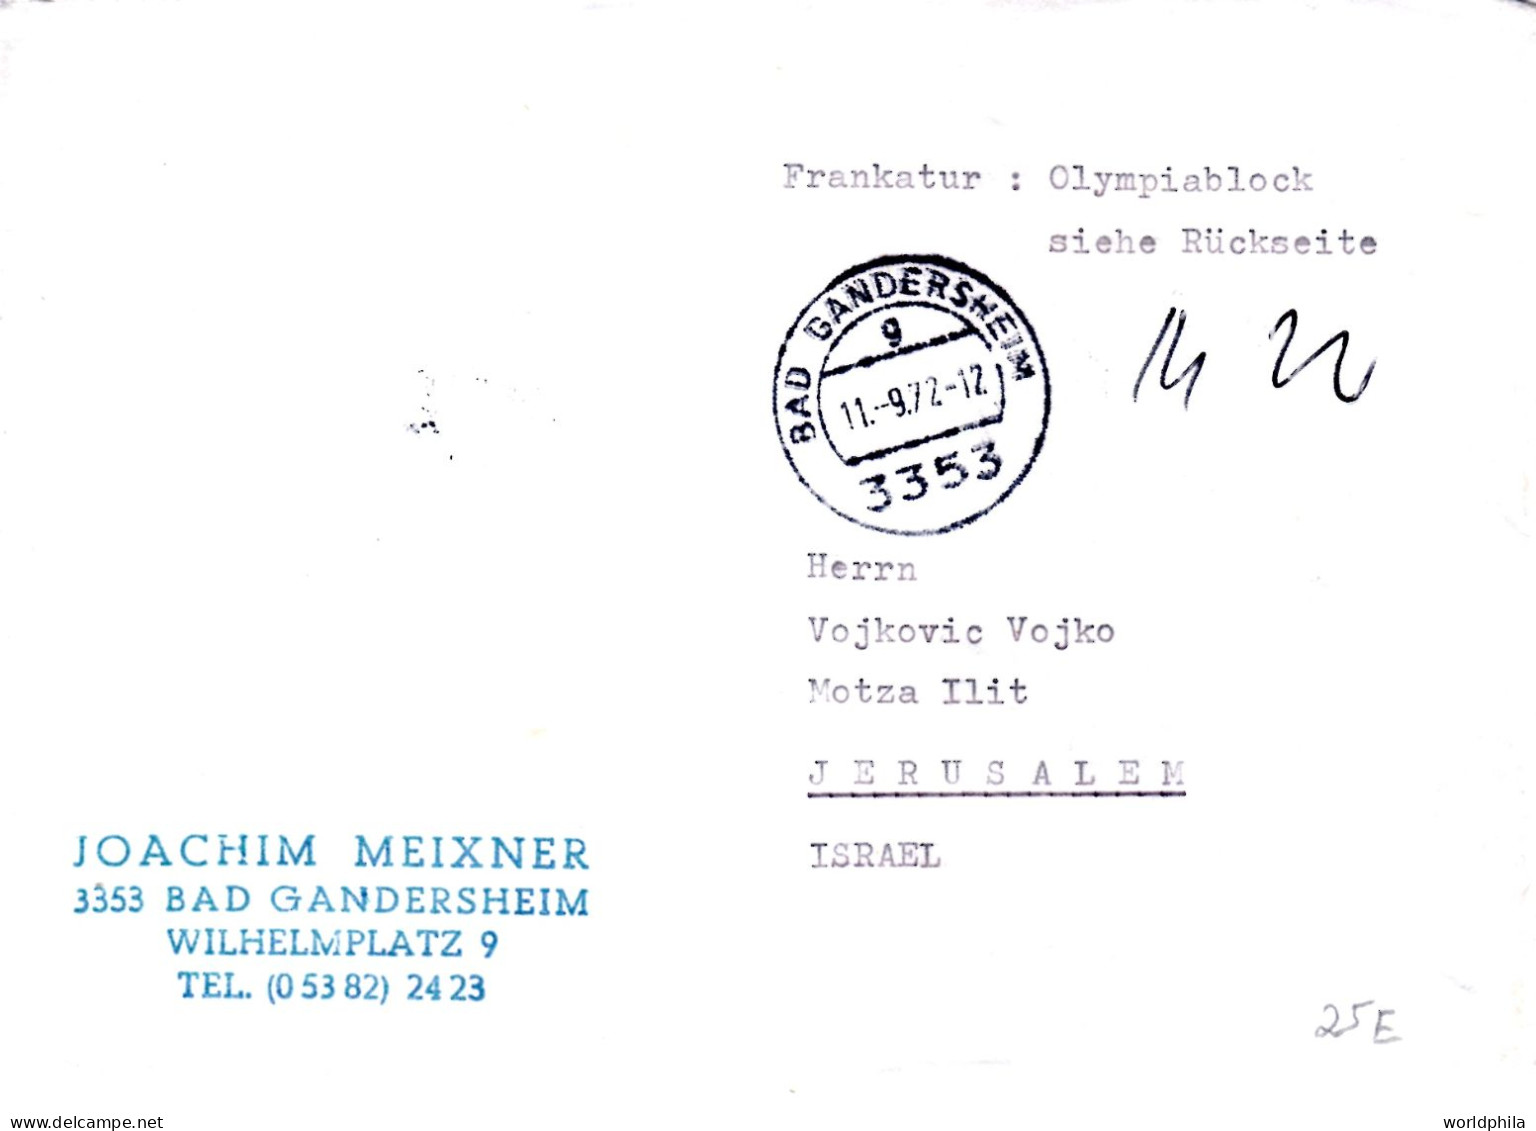 Deutschland To Israel 1972 Olympic Games Olympiablock Mi#7 Mailed Cover I - Ete 1972: Munich